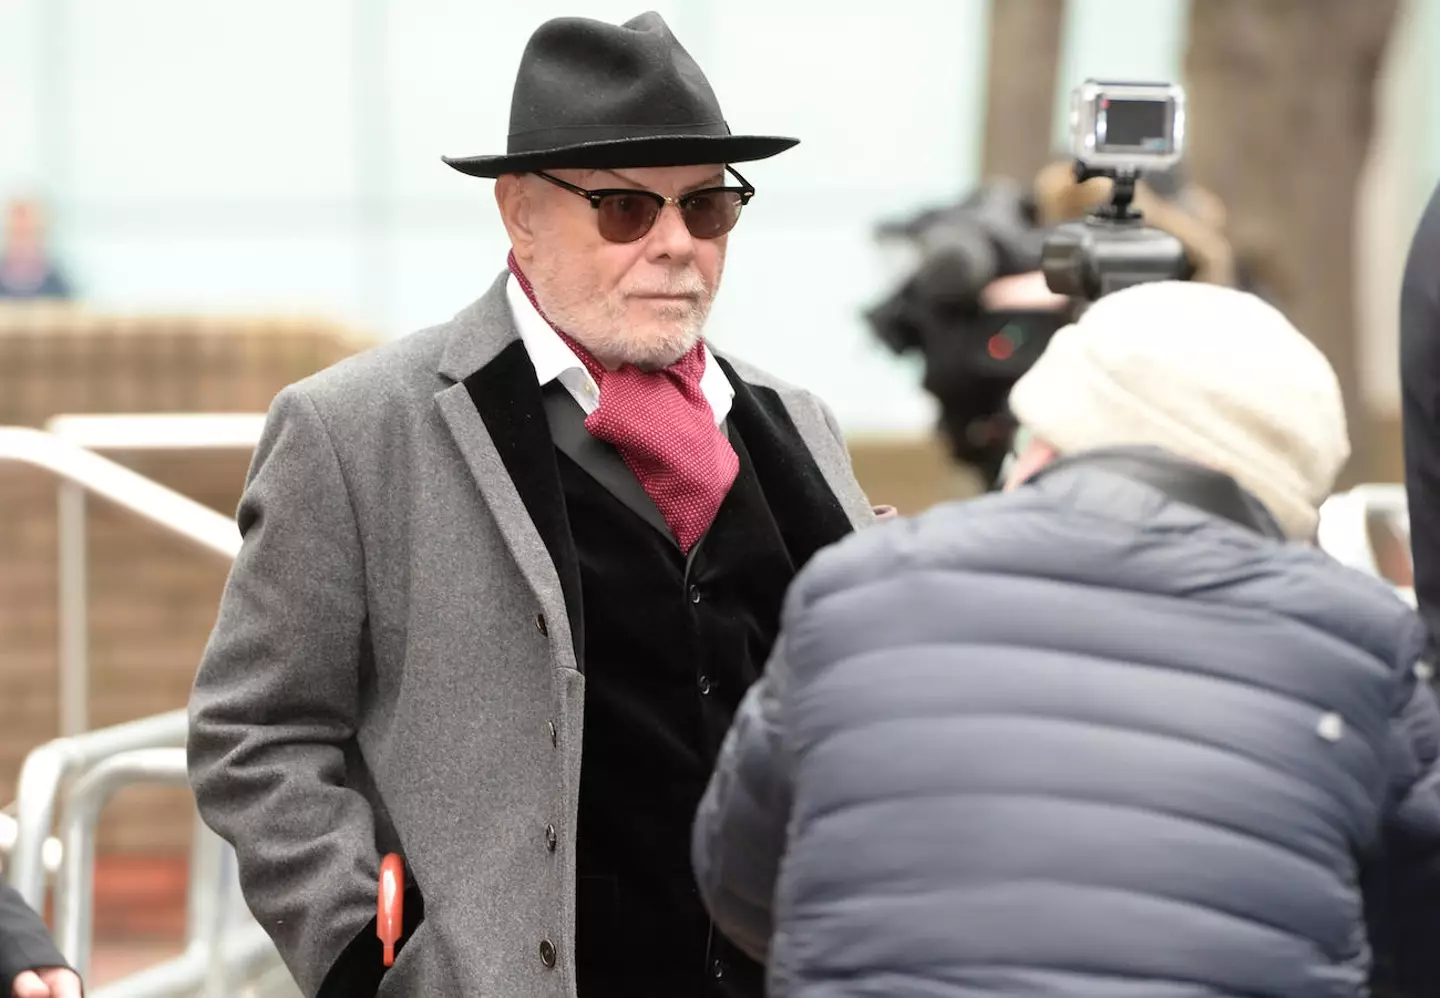 Gary Glitter's son wants to meet his father in person now he's been released from prison.